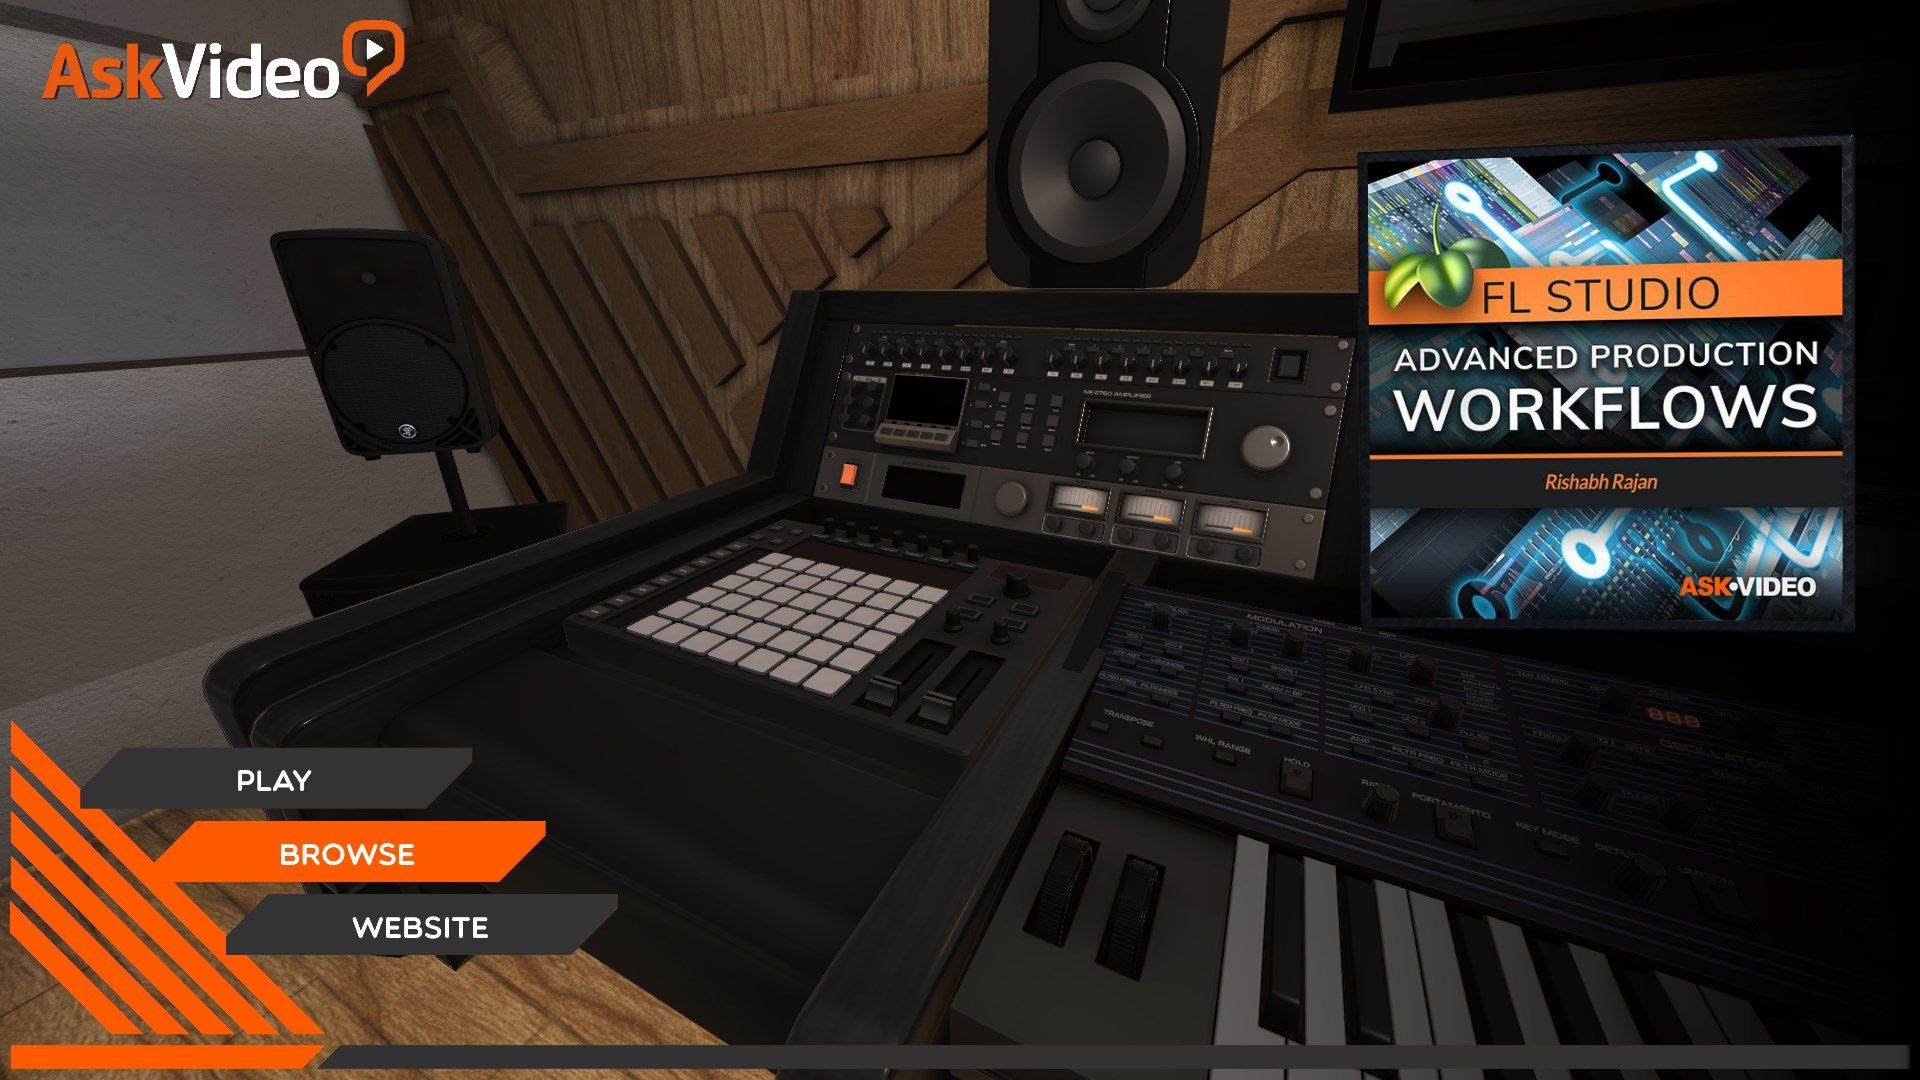 Advanced Production Workflows Course For FL Studio